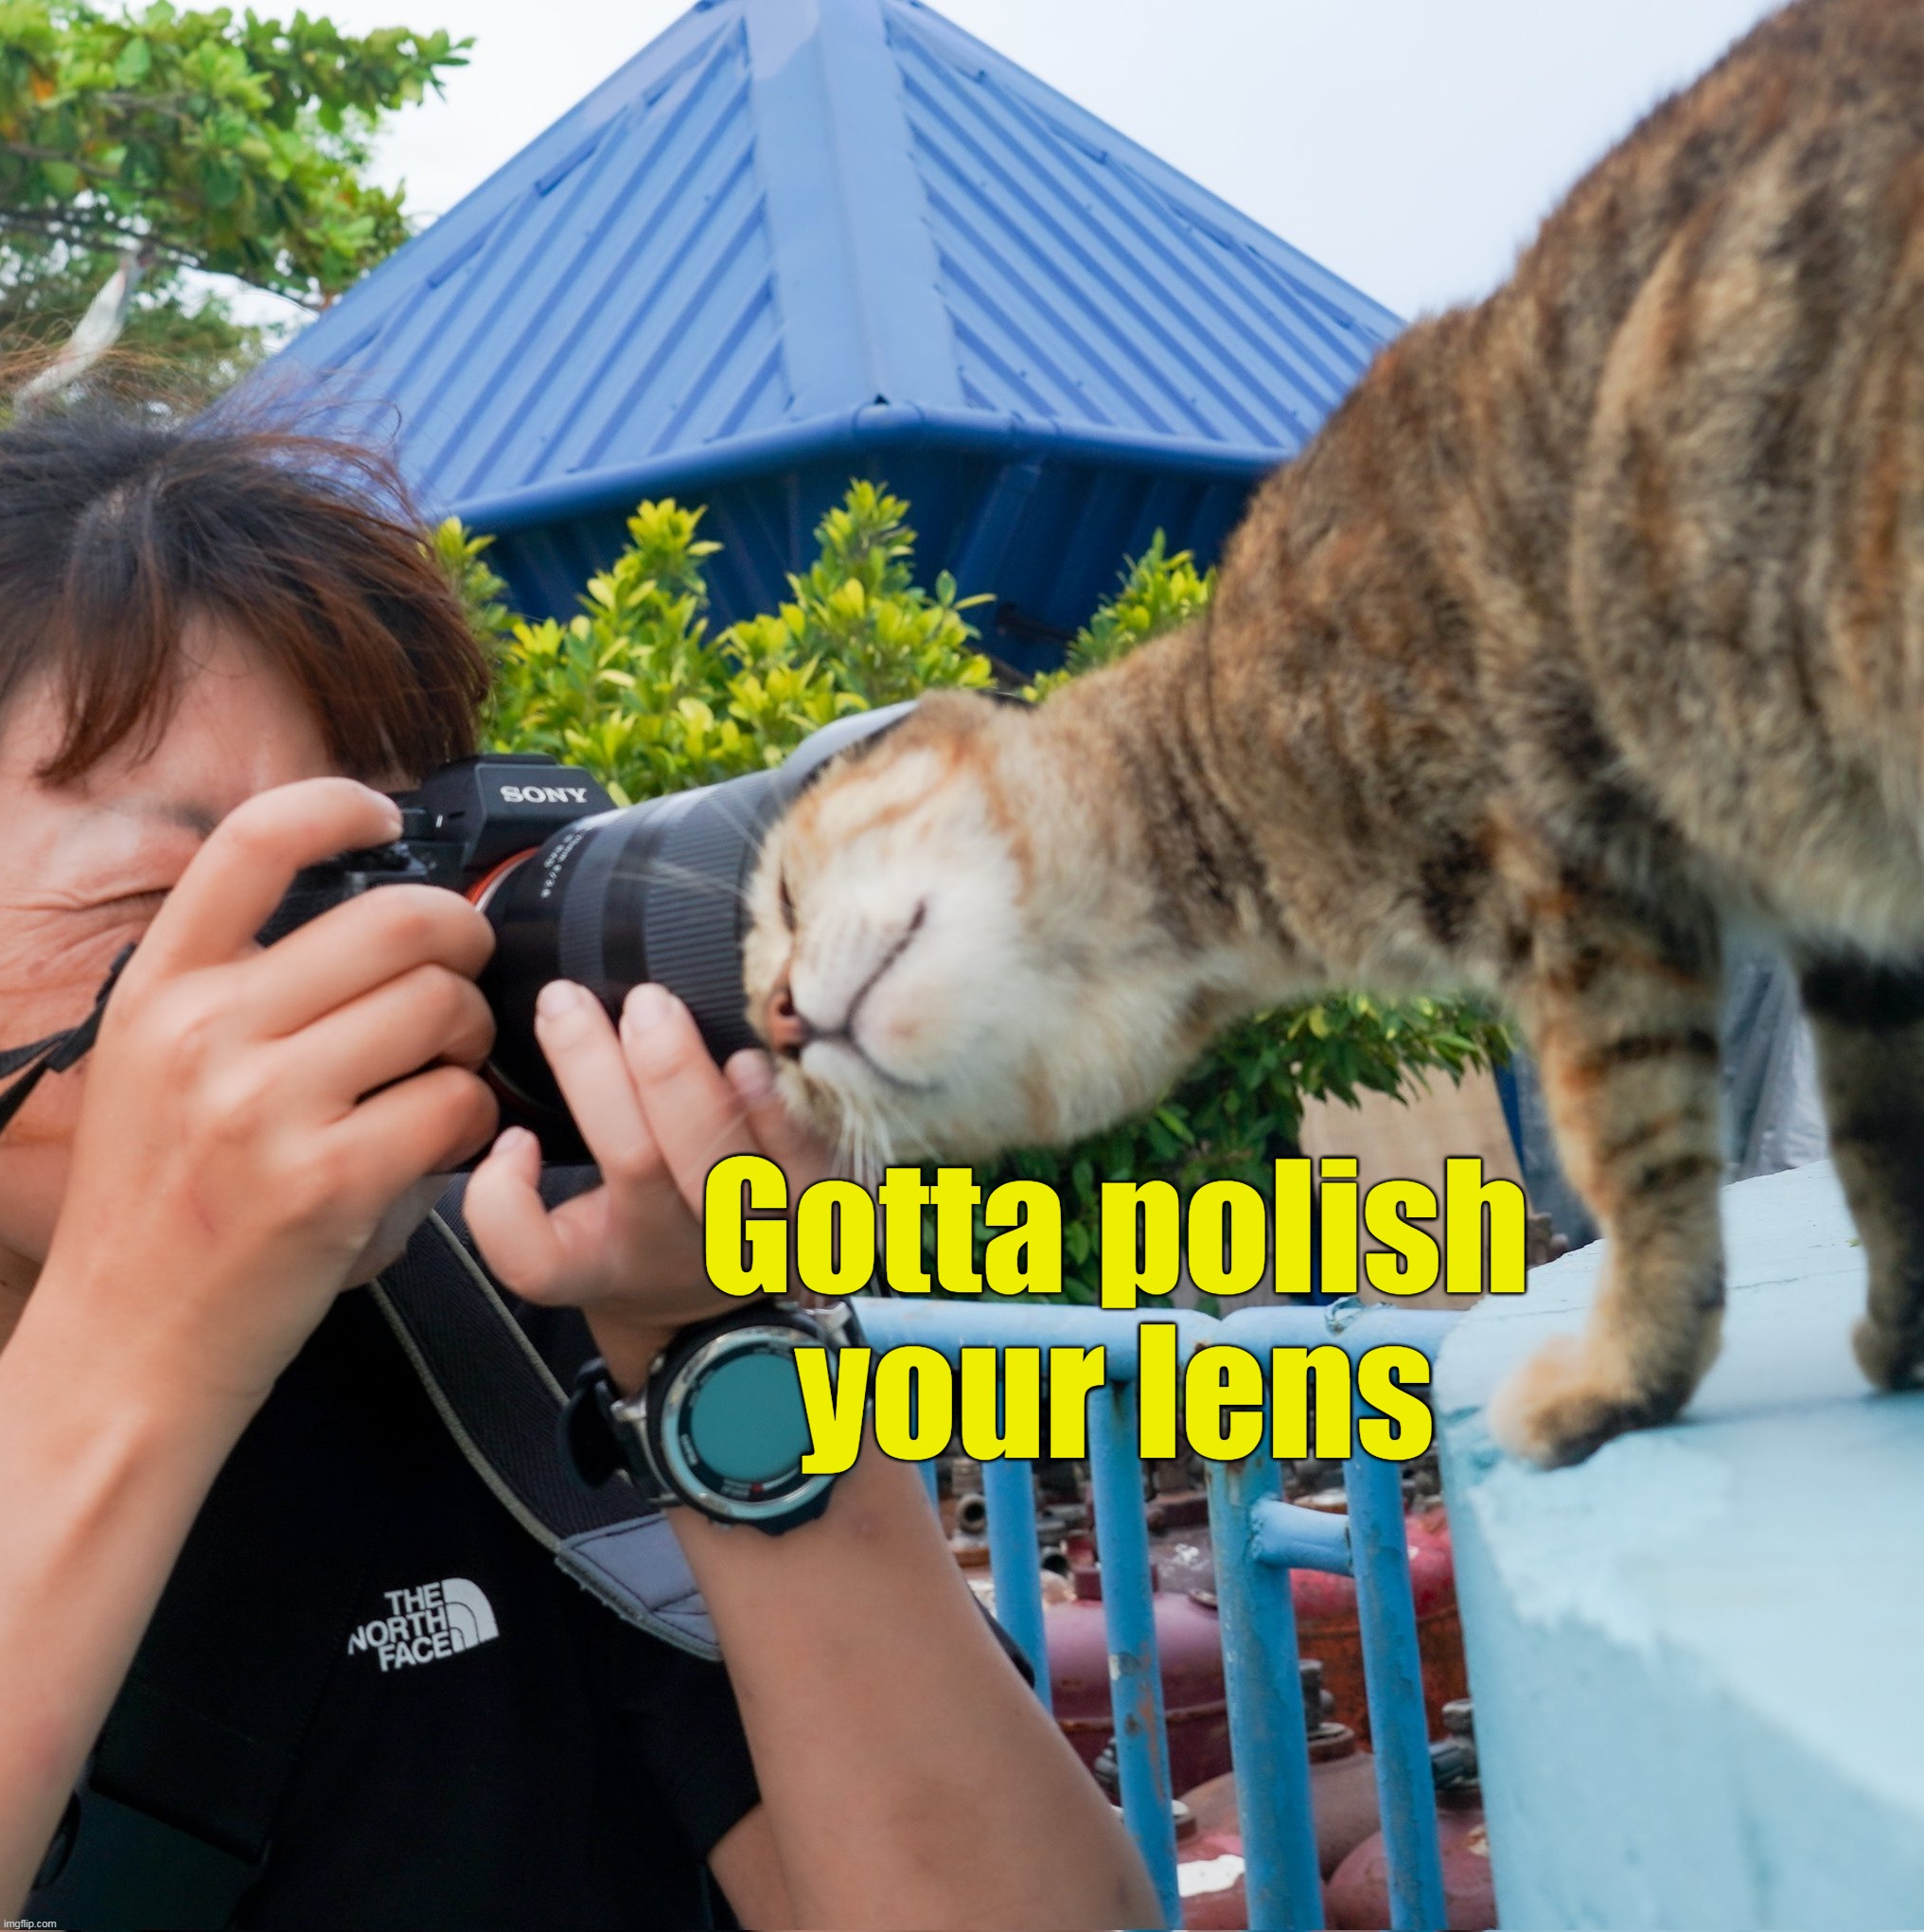 Gotta polish your lens | image tagged in meme,memes,funny,cat,cats | made w/ Imgflip meme maker